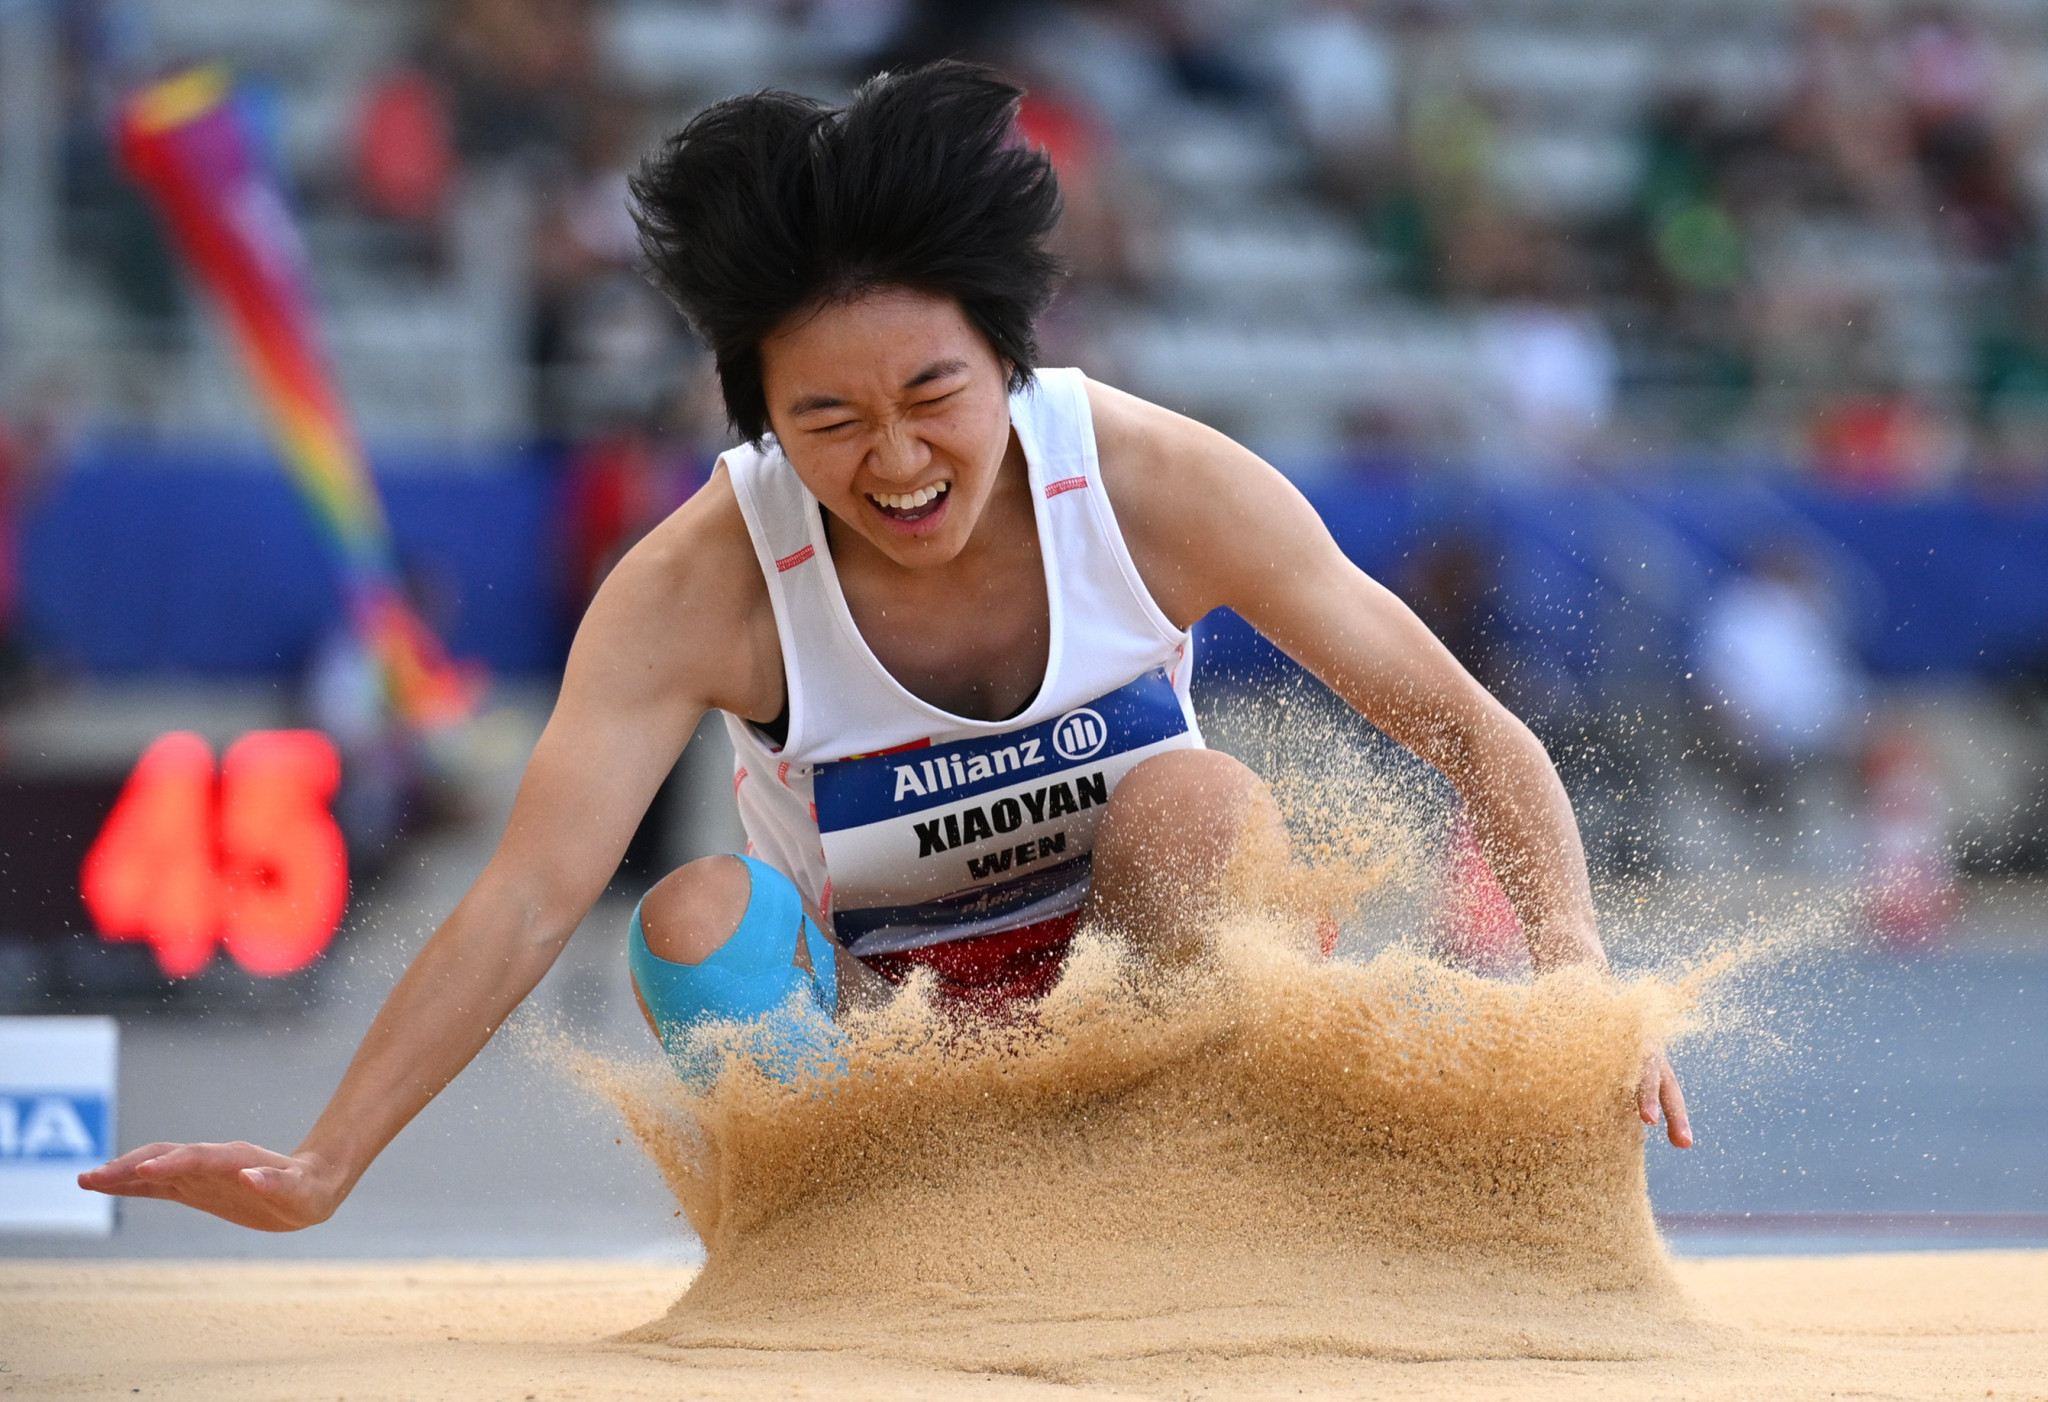 China's Wen Xiaoyan set one of four world records on day three at the World Para Athletics Championships in the women's T37 long jump ©Getty Images